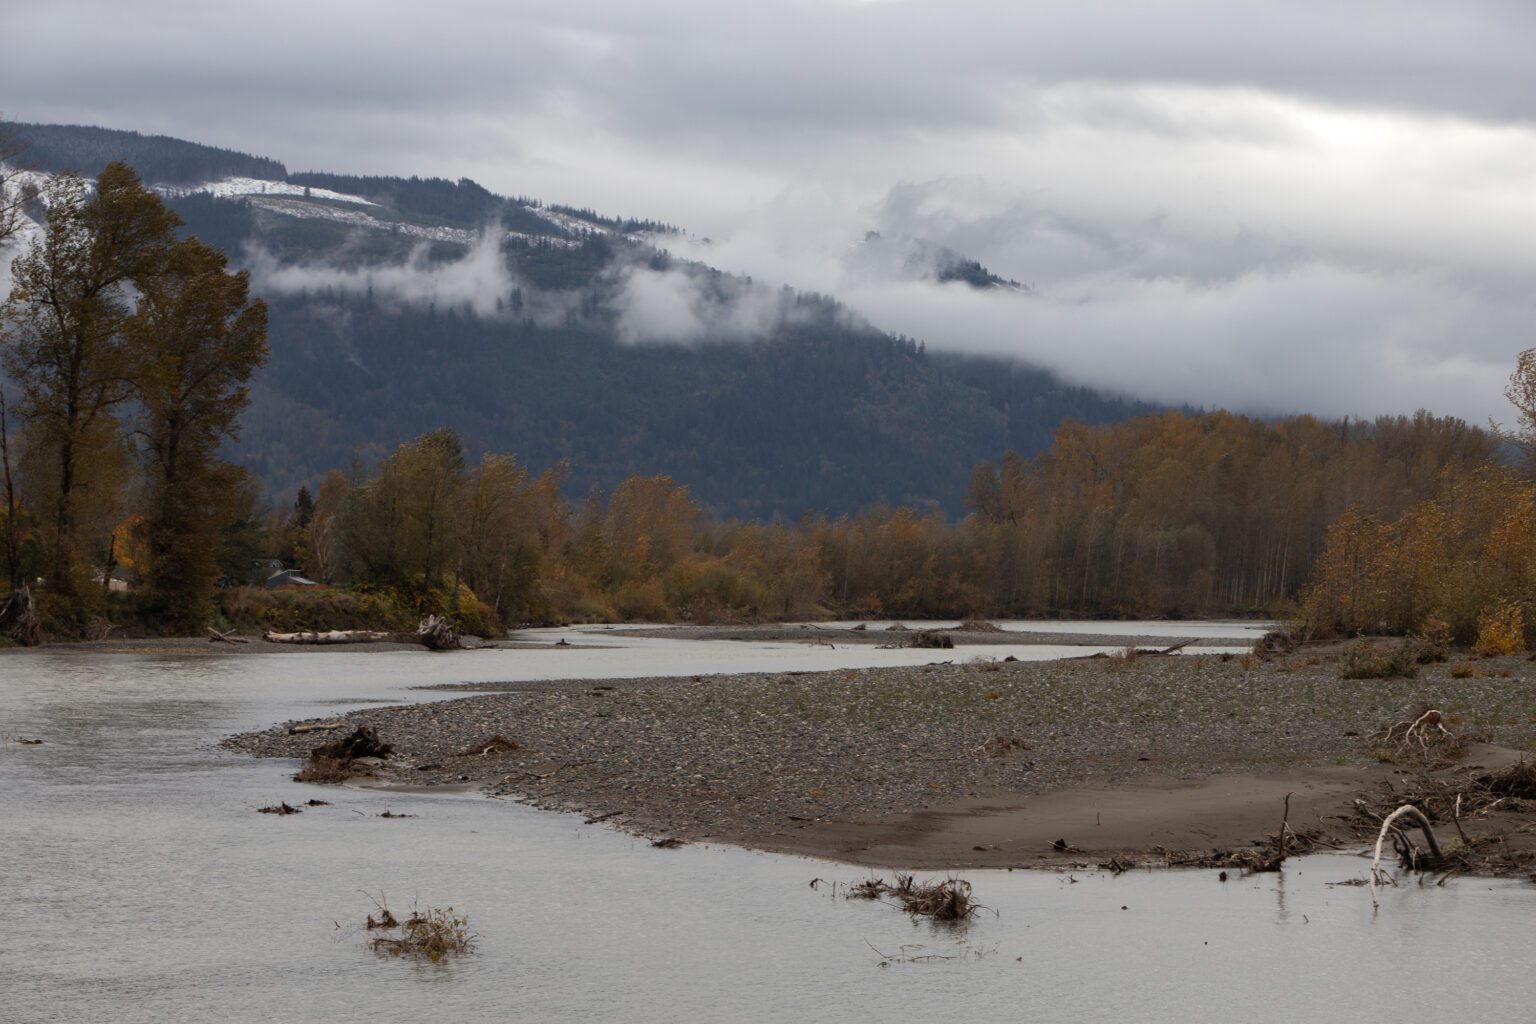 The Nooksack River flooded from the banks beyond the tree line.